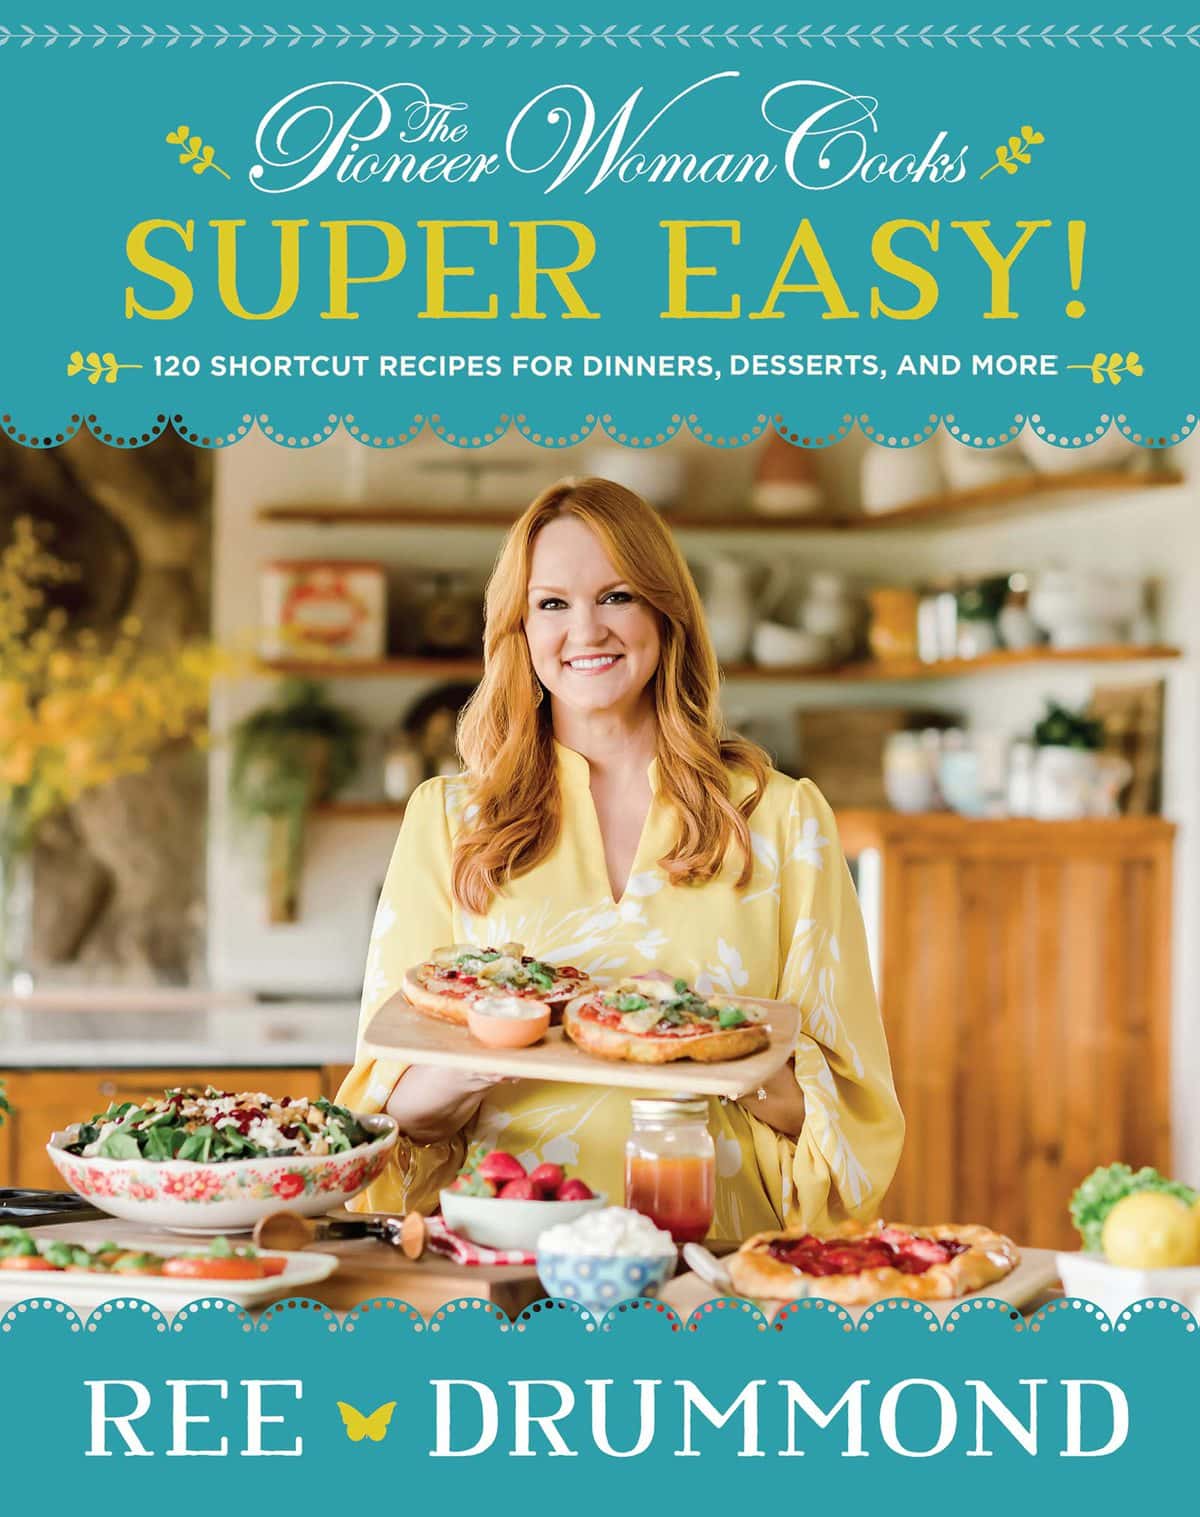 Book - \"The Pioneer Woman Cooks Super Easy!\"